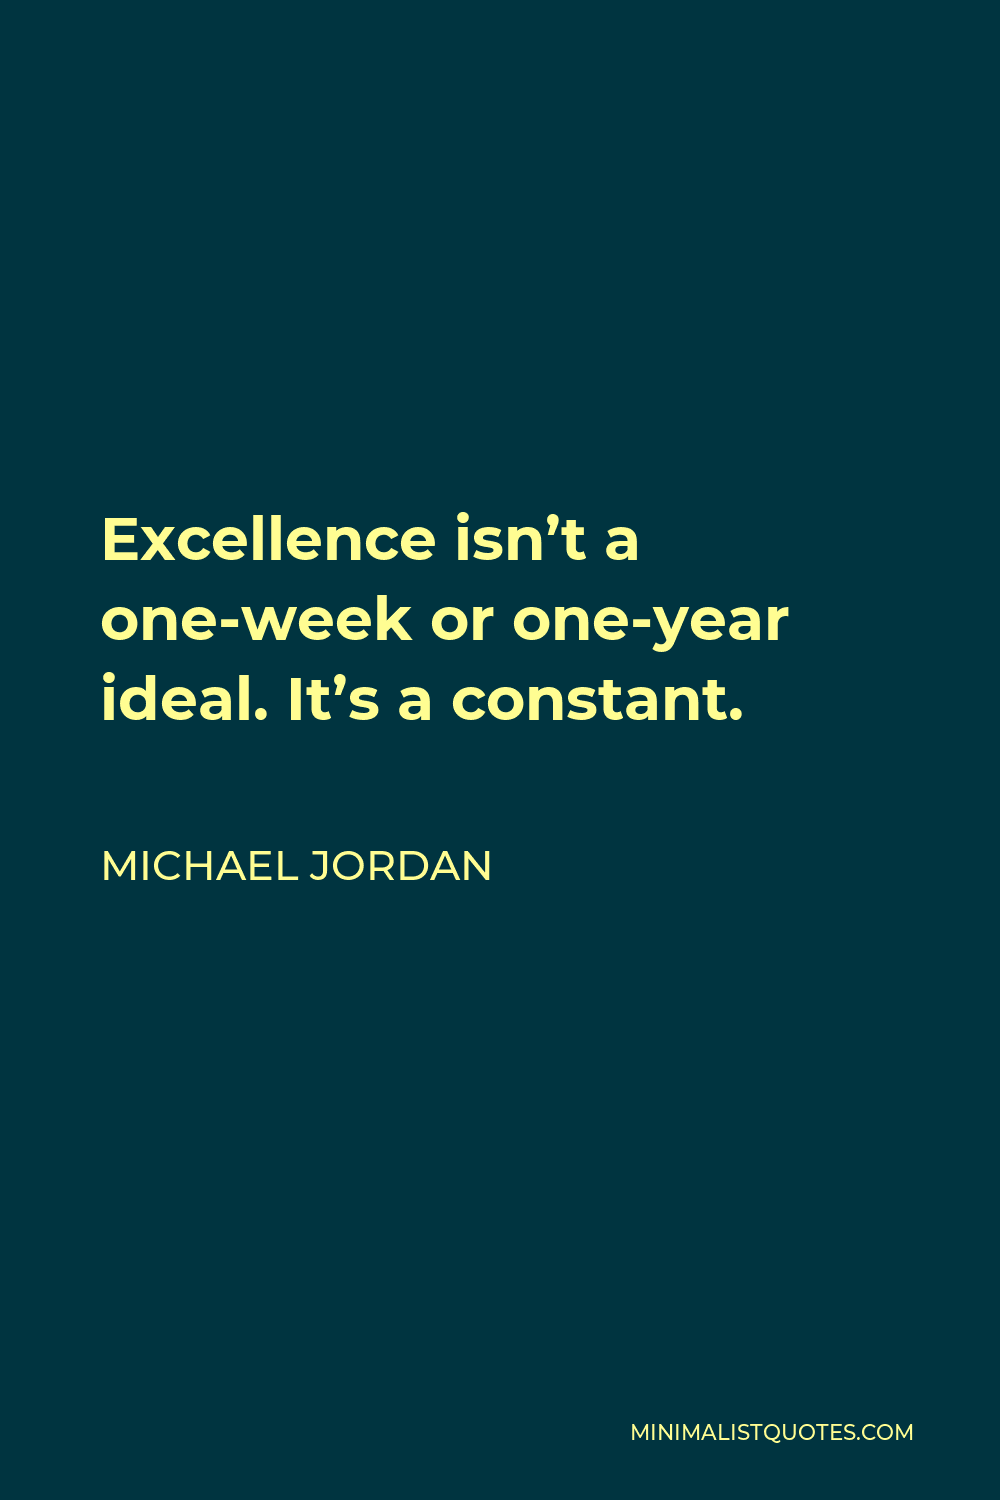 Michael Jordan Quote - Excellence isn’t a one-week or one-year ideal. It’s a constant.